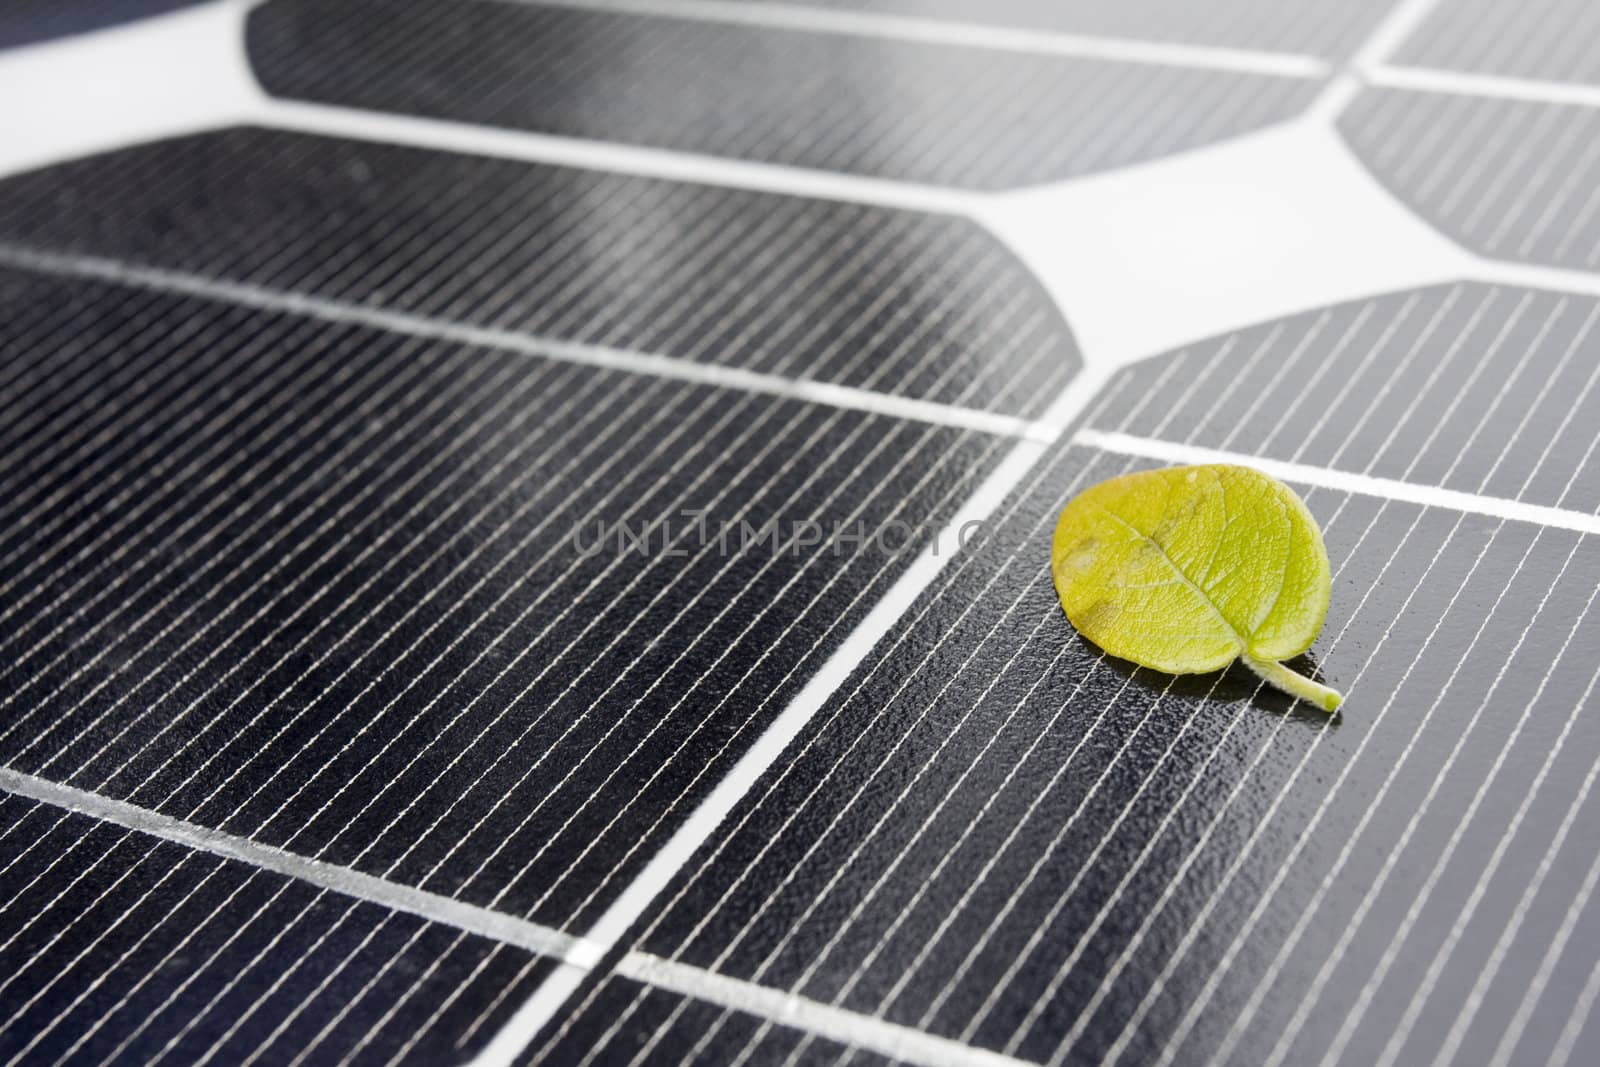 angle, cell, clean, conductive, ecology, energy, environment, grid, light, lines, panel, parallel, pattern, perspective, photons, power, rectangles, reflection, rhombus, semiconductor, shadow, silicon, solar, source, wafer,leaf,green,Closeup of Solar Panels,useful for alternative energy themes.